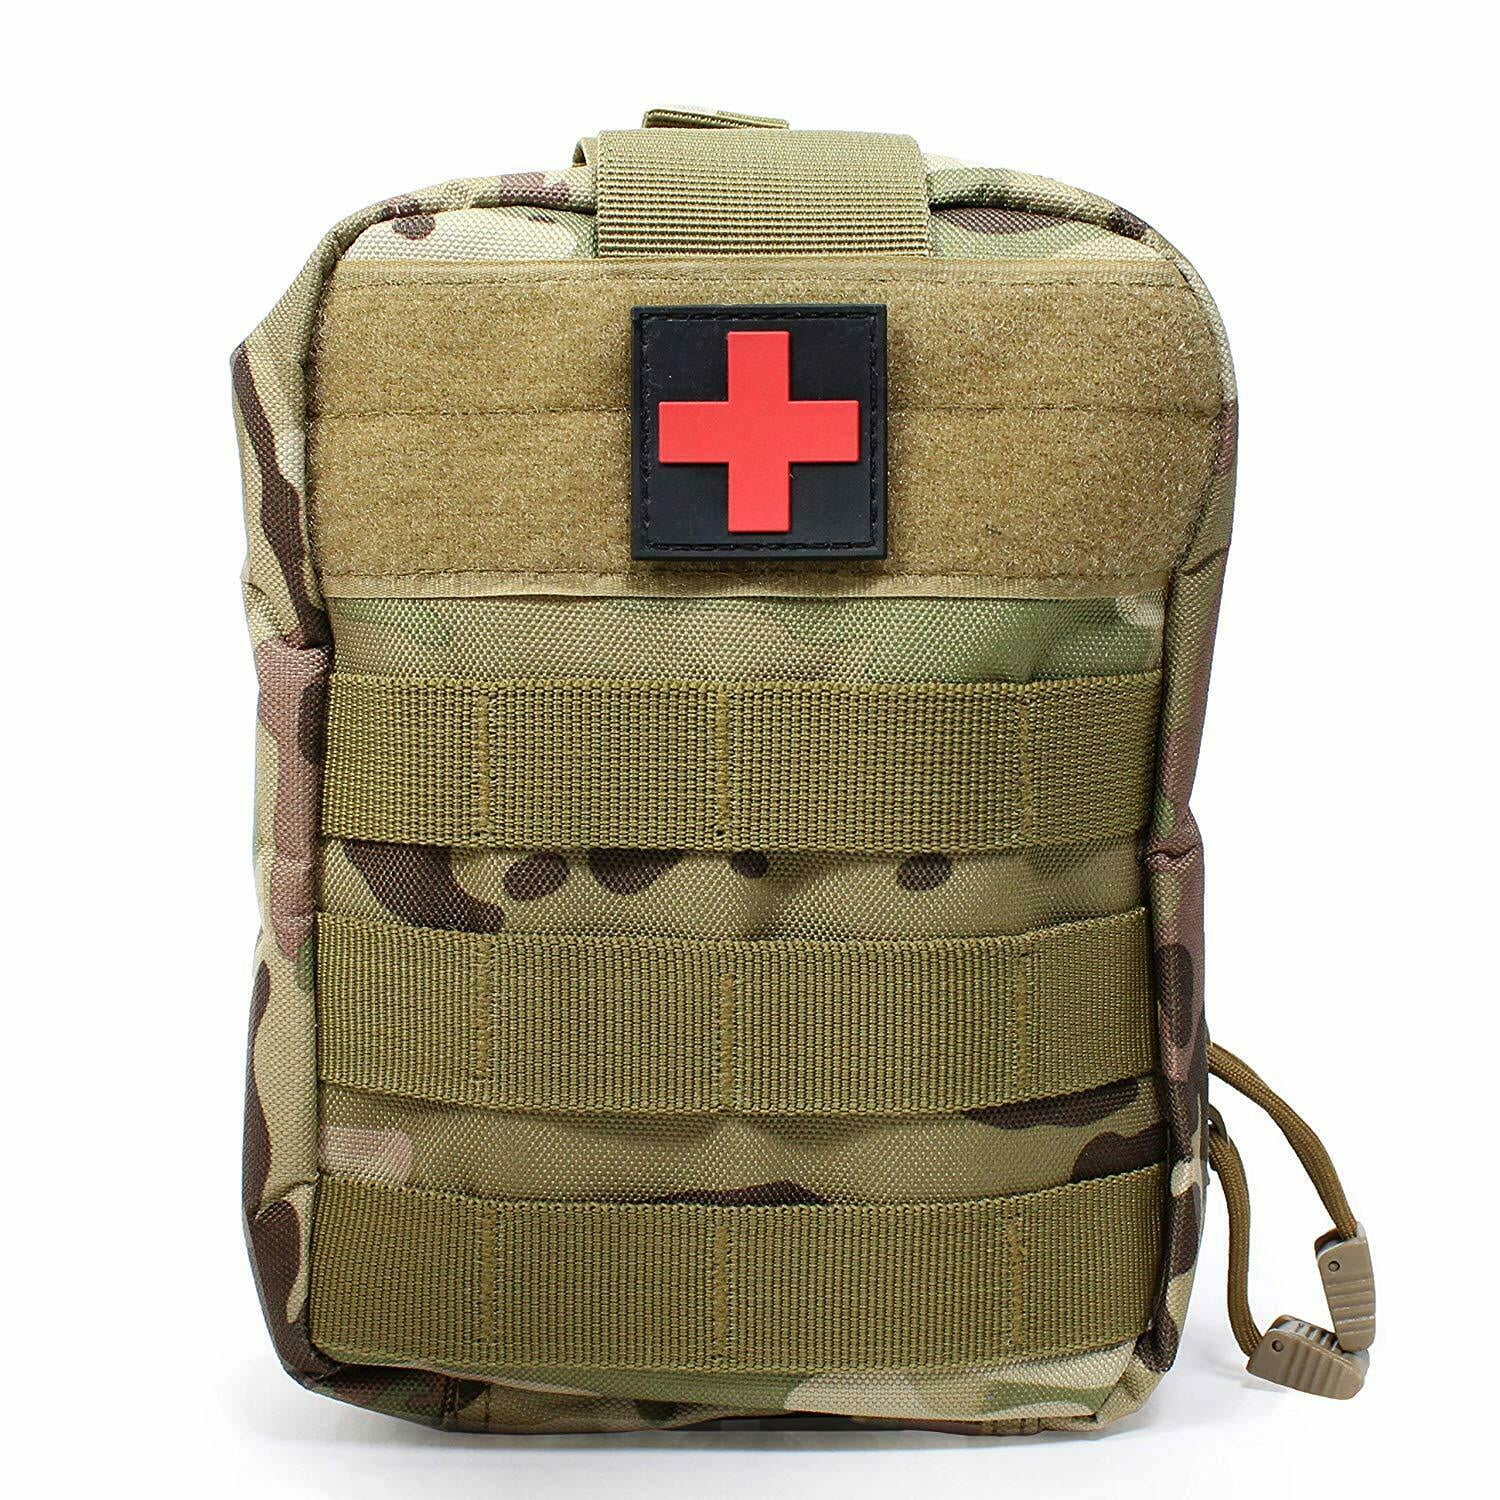 Tactical First Aid Survival Rescue Kit Molle EMT Emergency Pouch Bag Medical CB